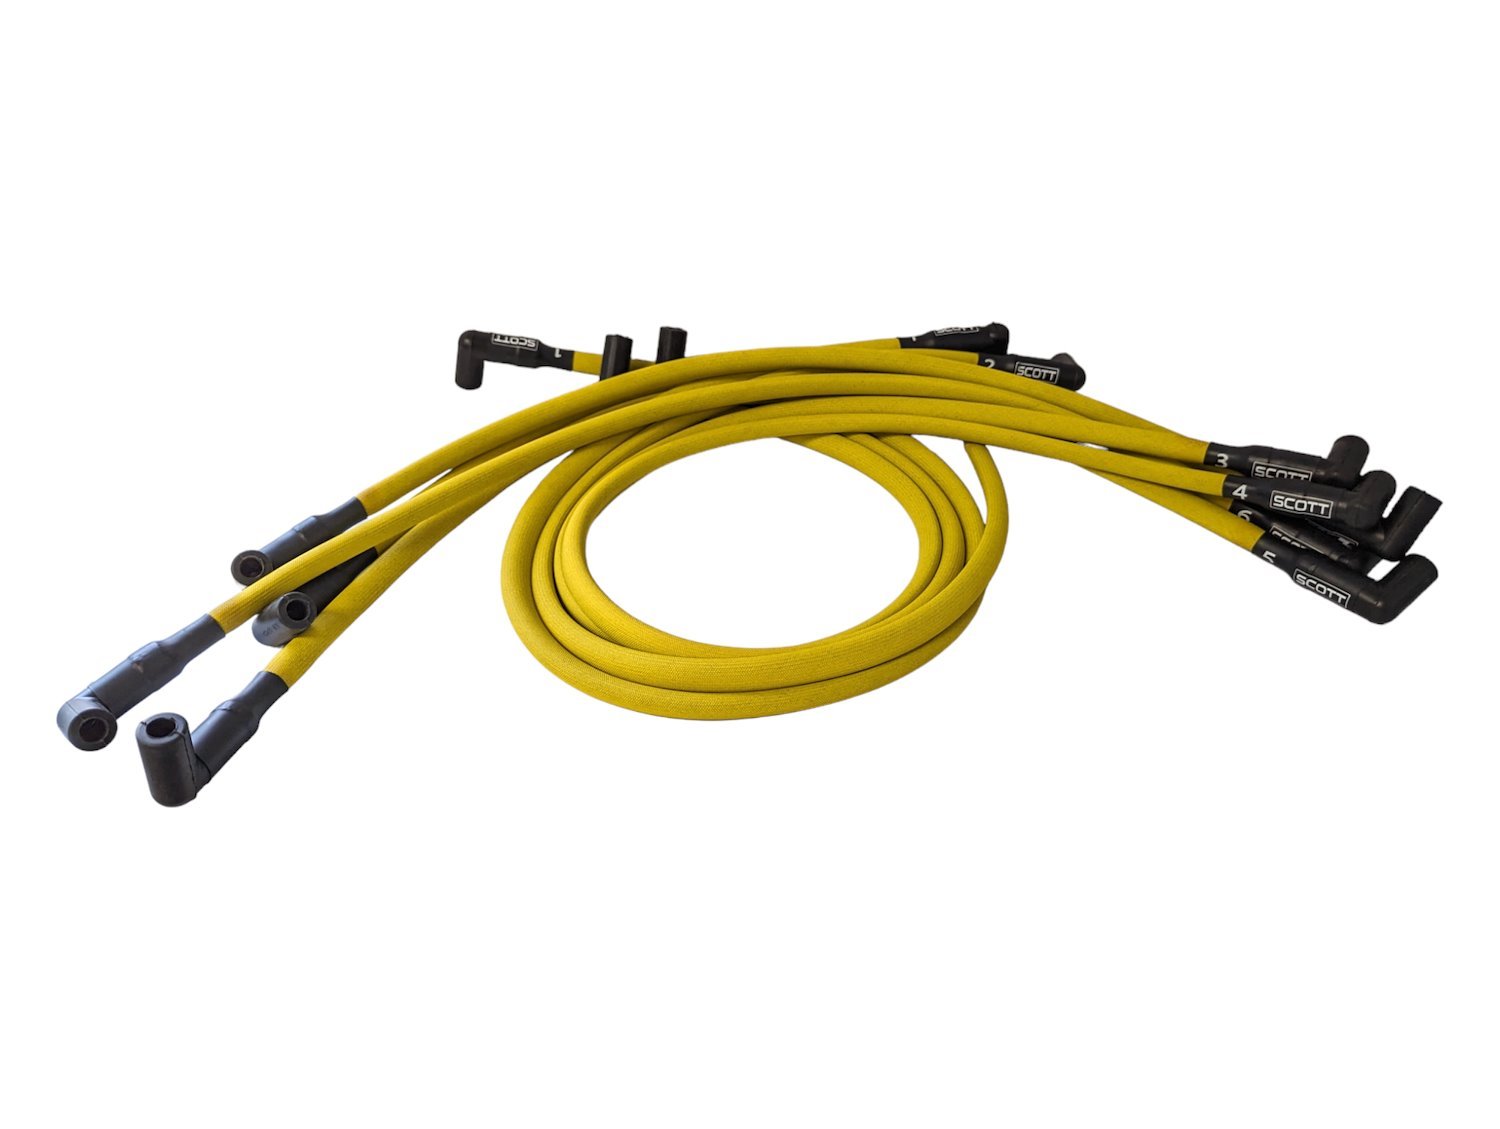 SPW300-PS-402-5 Super Mag Fiberglass-Oversleeved Spark Plug Wire Set for Small Block Chevy, Over Valve Cover [Yellow]